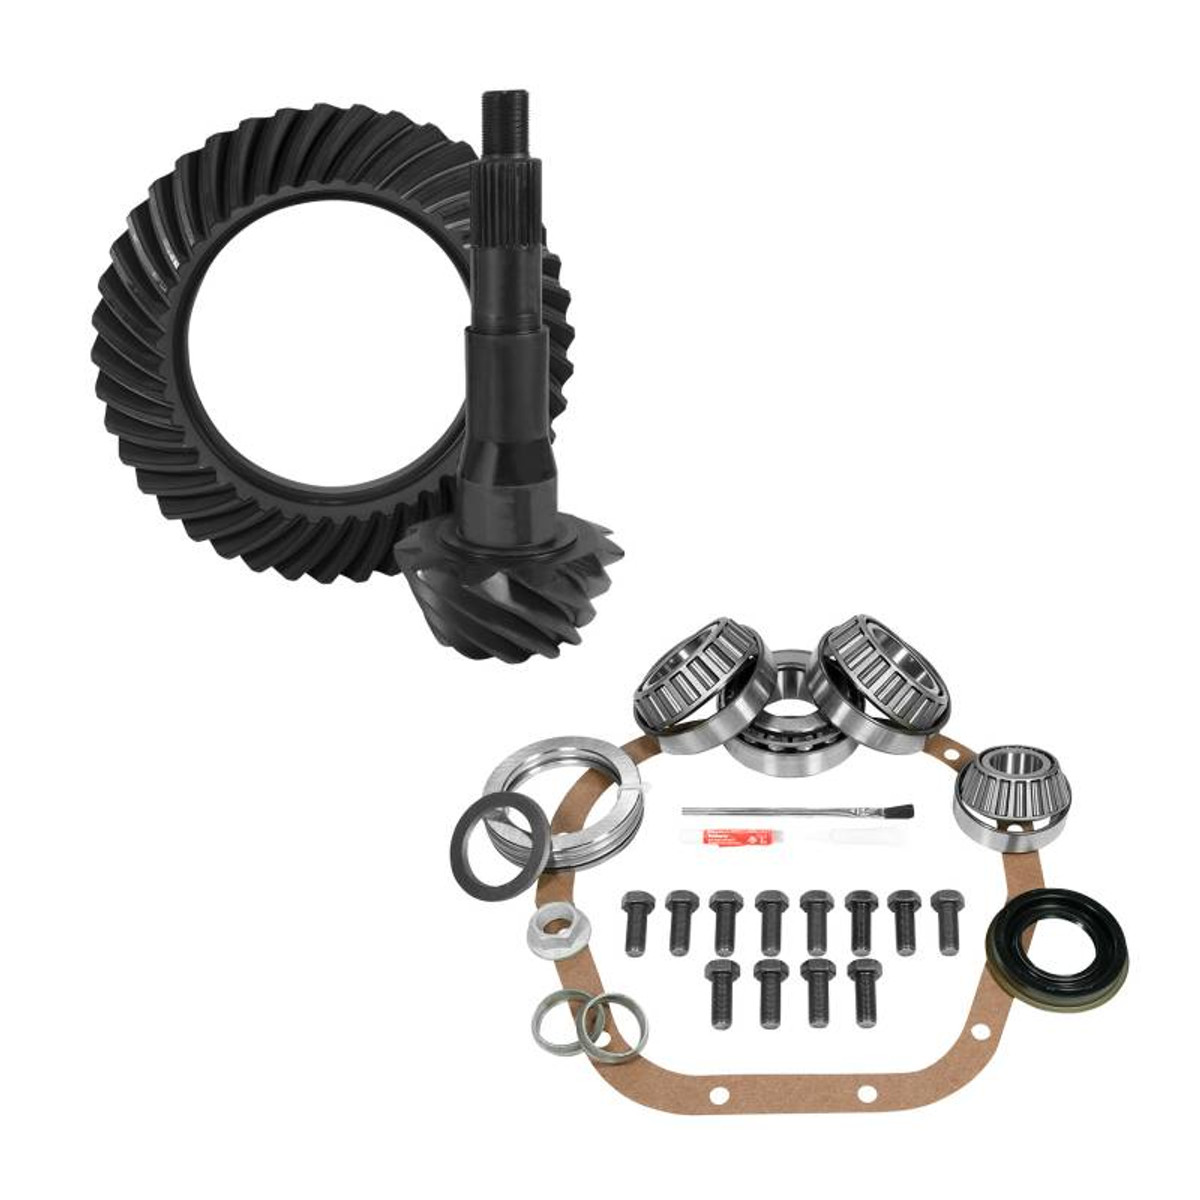 10.5 inch Ford 4.11 Rear Ring and Pinion Install Kit YGK2136